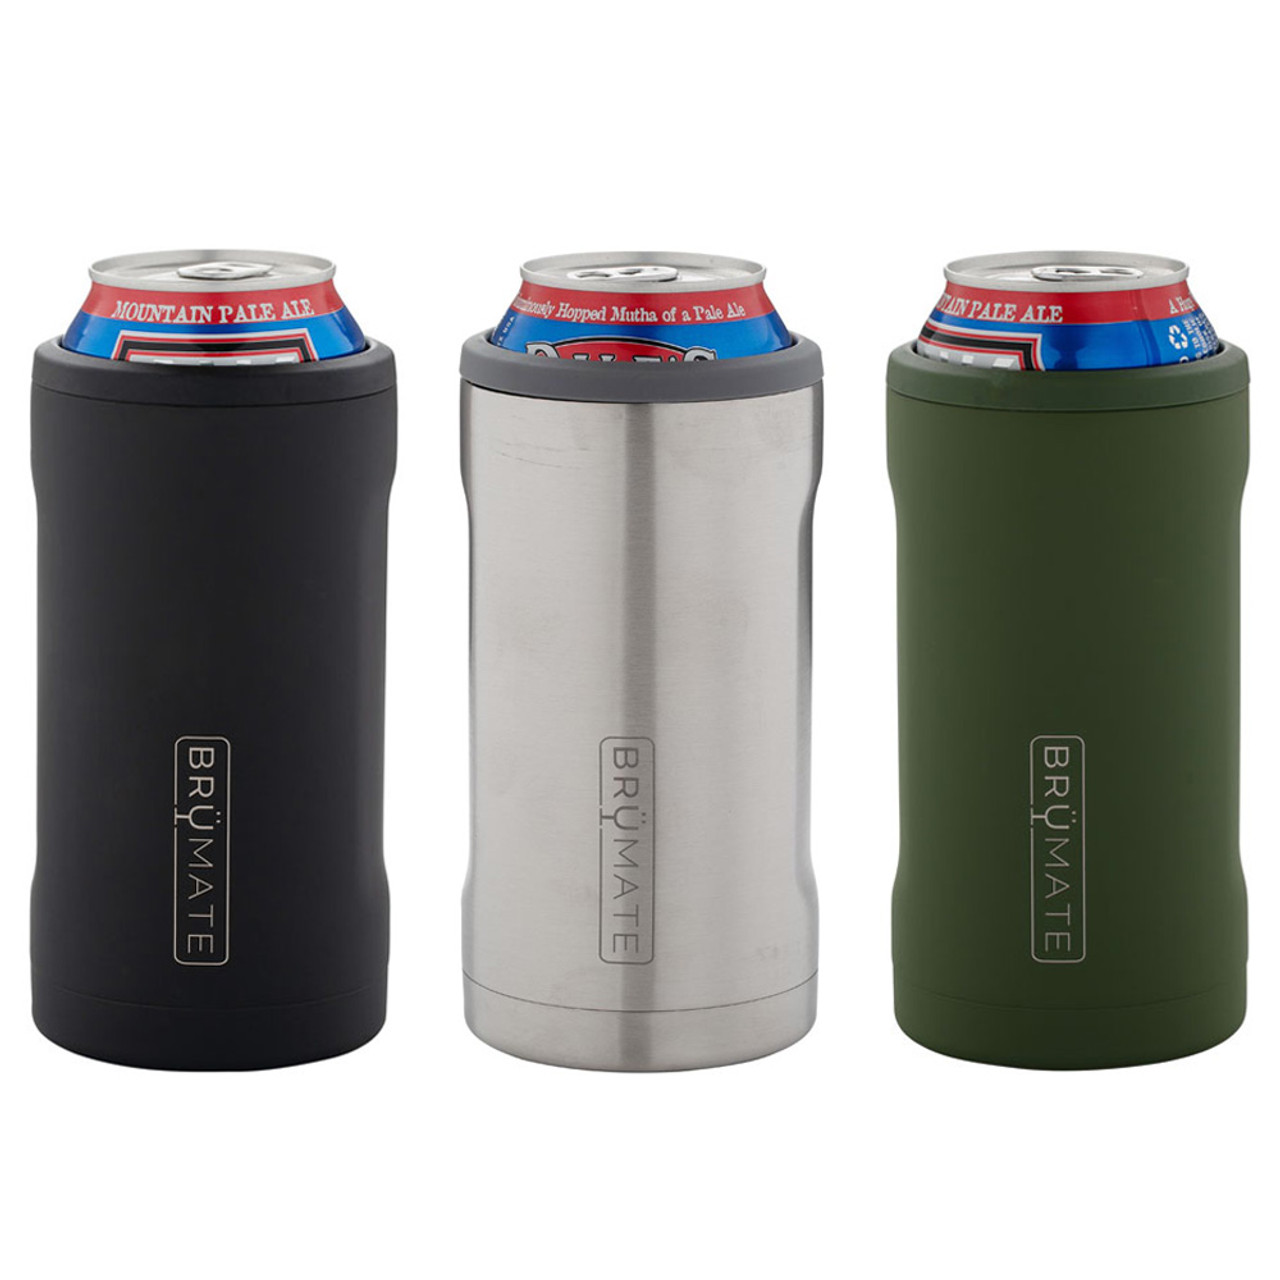 BrüMate Hopsulator Slim Double-walled Stainless Steel Insulated Can Cooler for 12 Oz Slim Cans Matte Gray